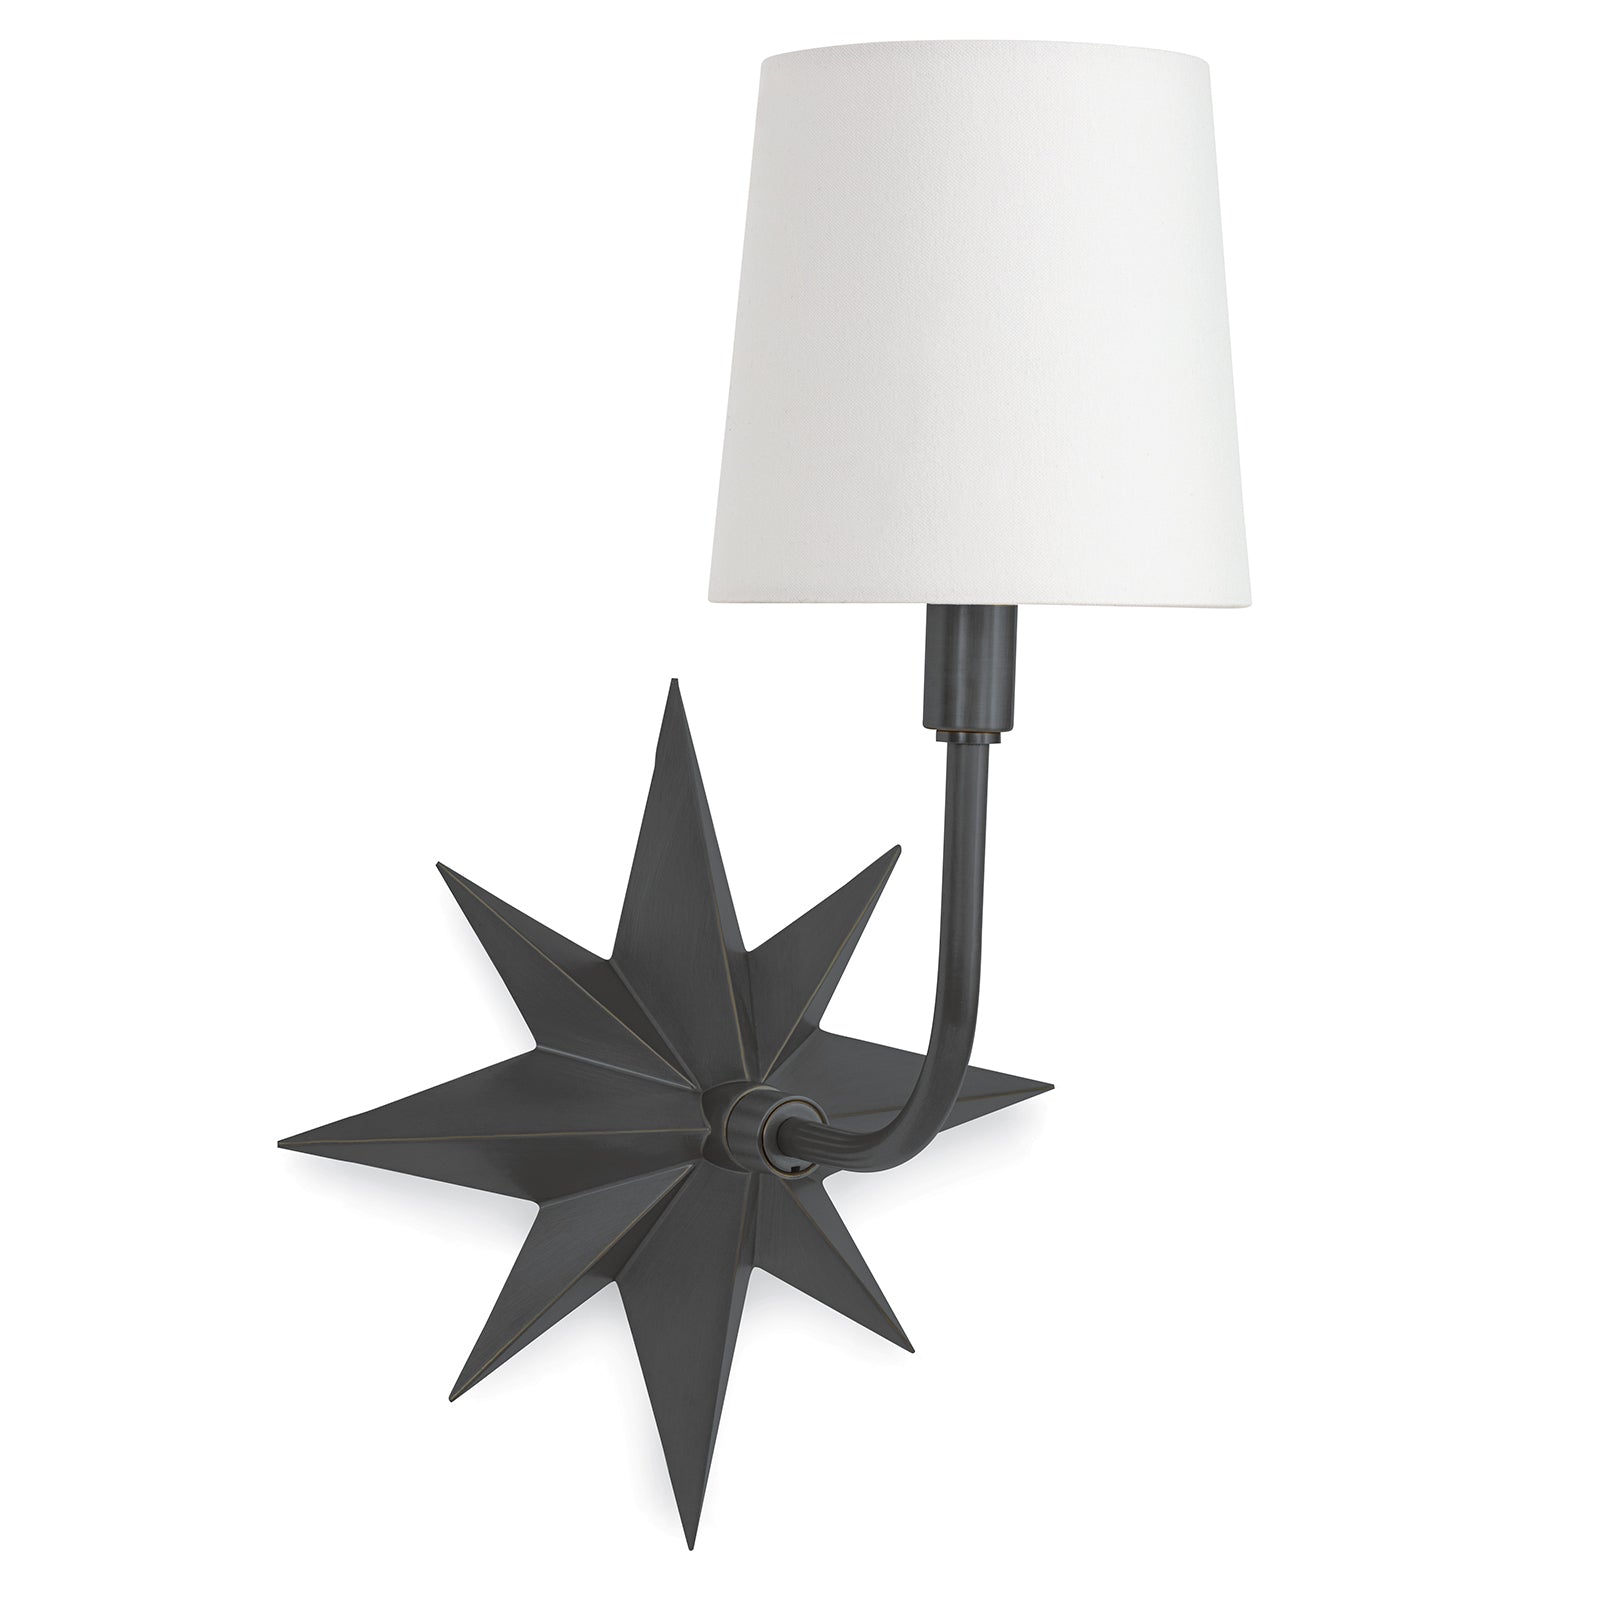 Etoile Sconce in Oil Rubbed Bronze by Coastal Living